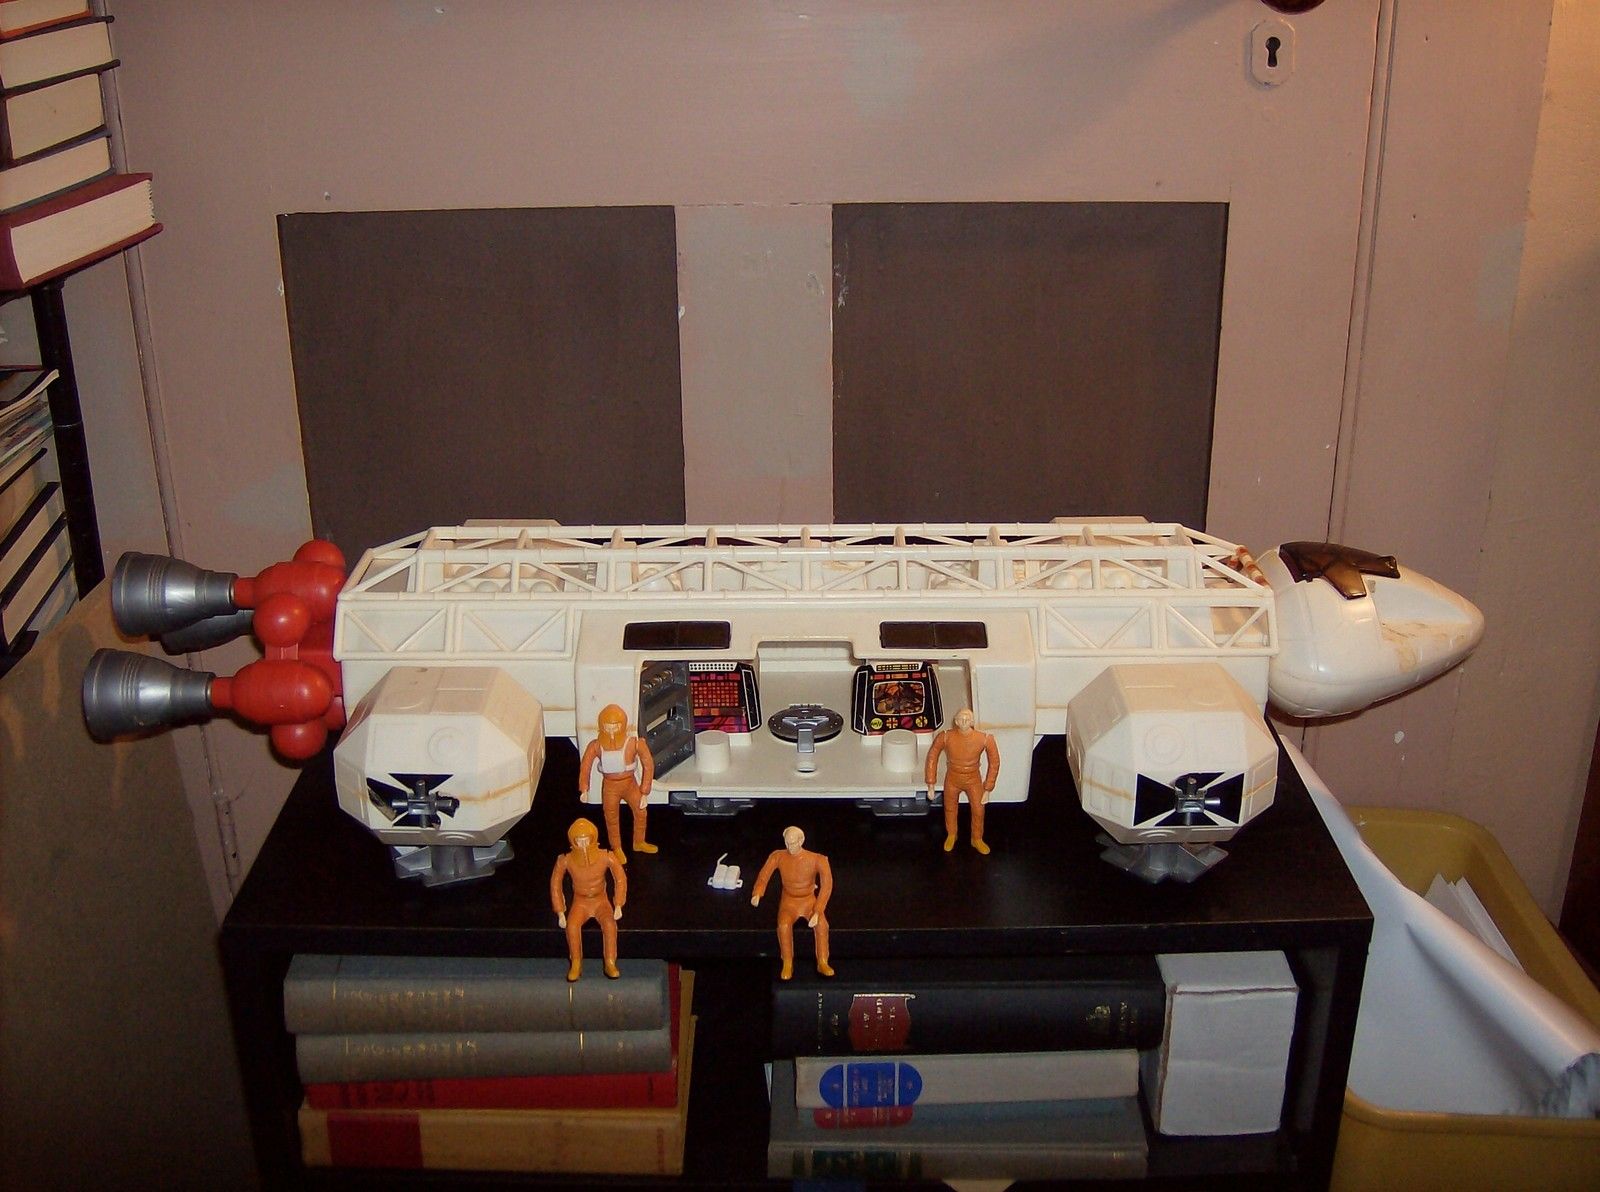 Space 1999 – Toy